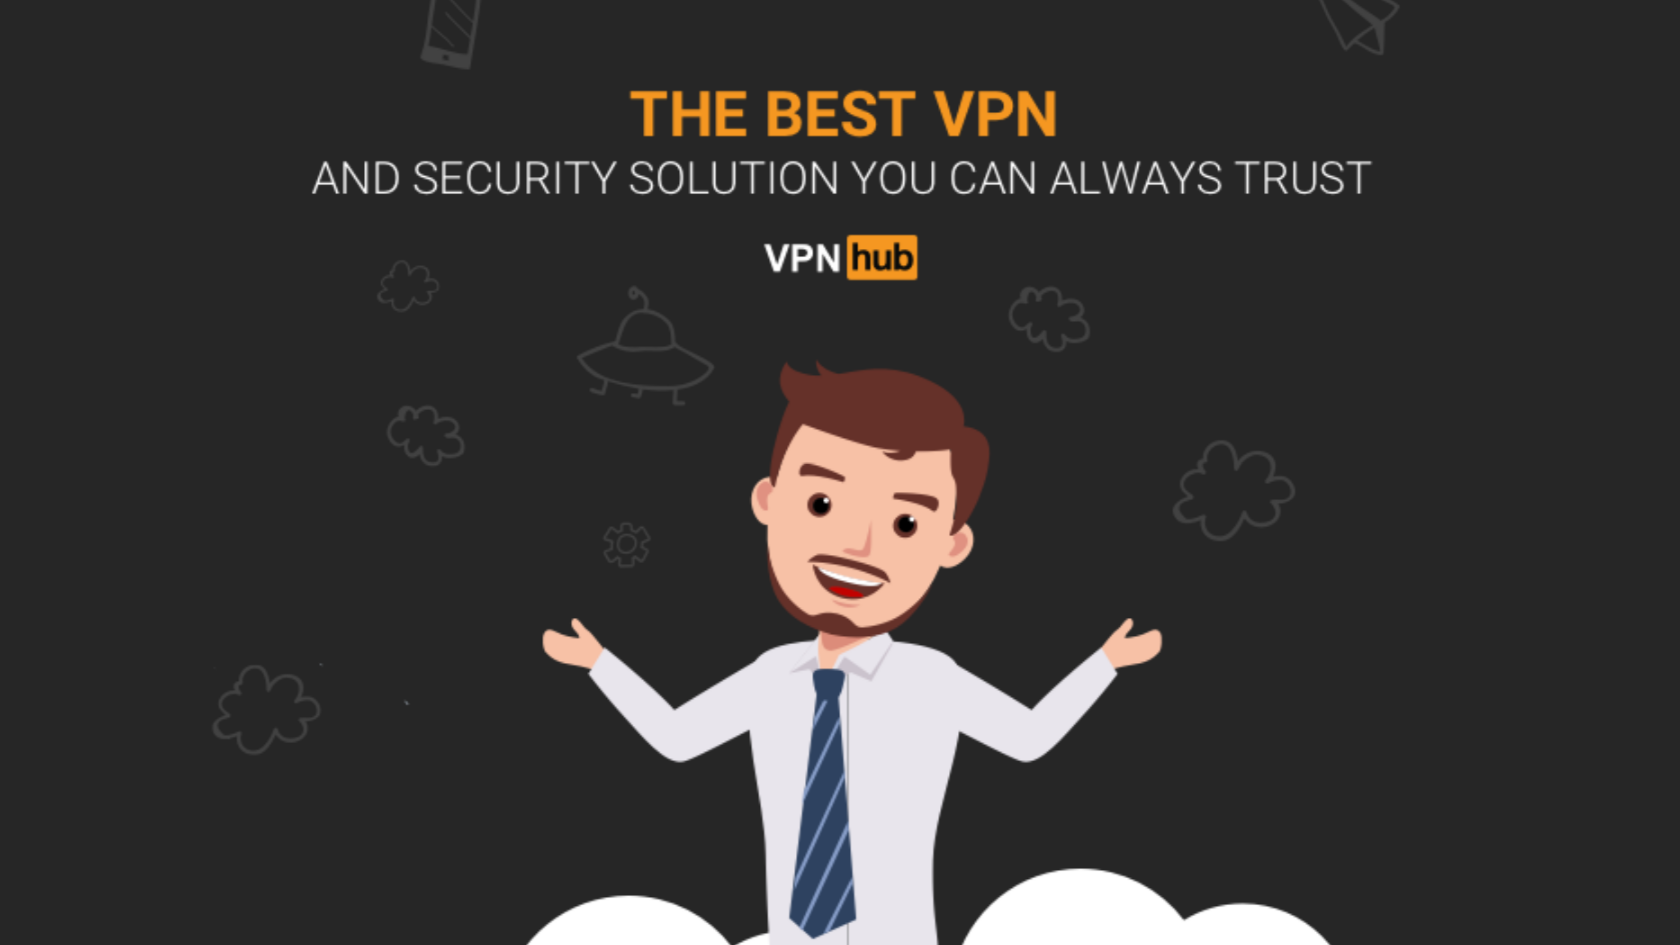 Free Vpn Porno - Pornhub made a free VPN (that's totally not just for watching porn)